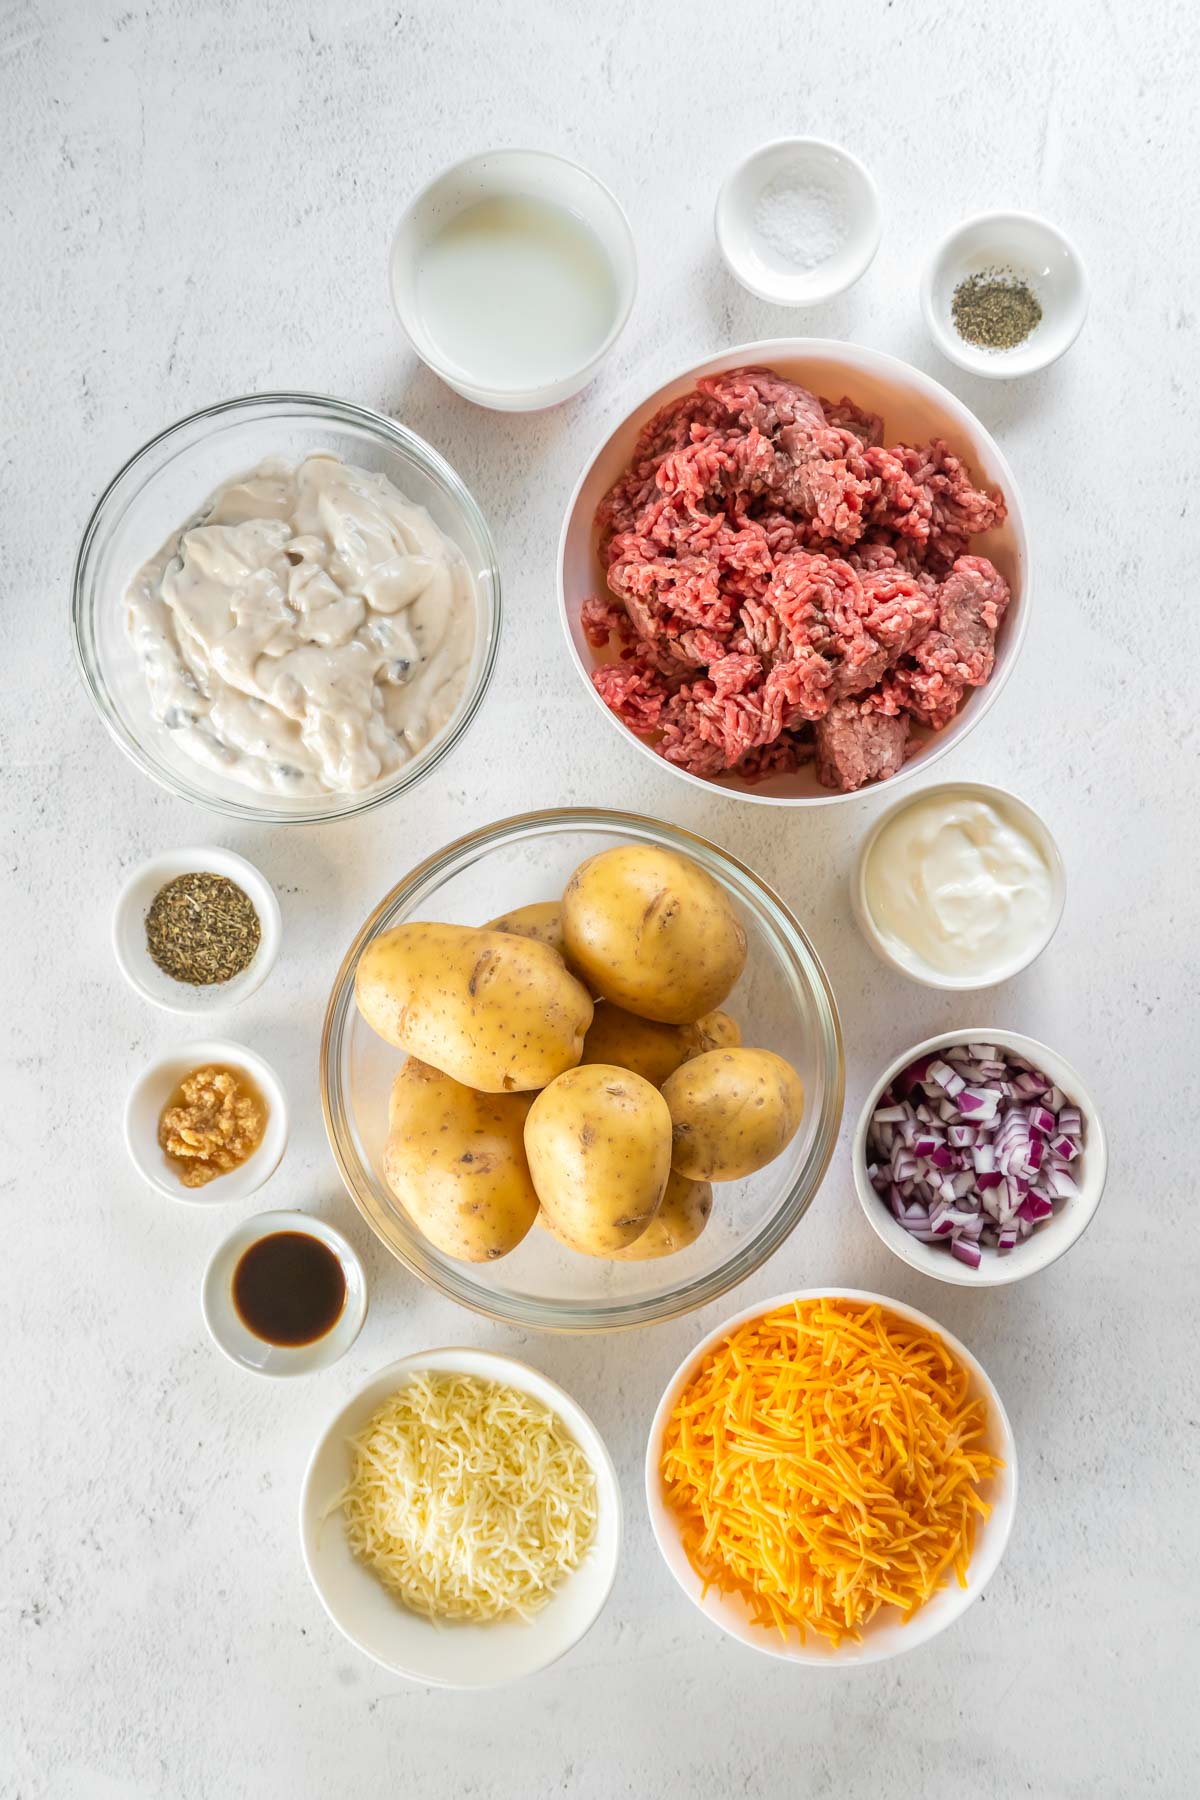 Ingredients displayed in bowls- yukon gold potatoes, ground beef, condensed soup, shredded cheese, garlic, milk, sour cream, worcestershire sauce, salt and pepper.